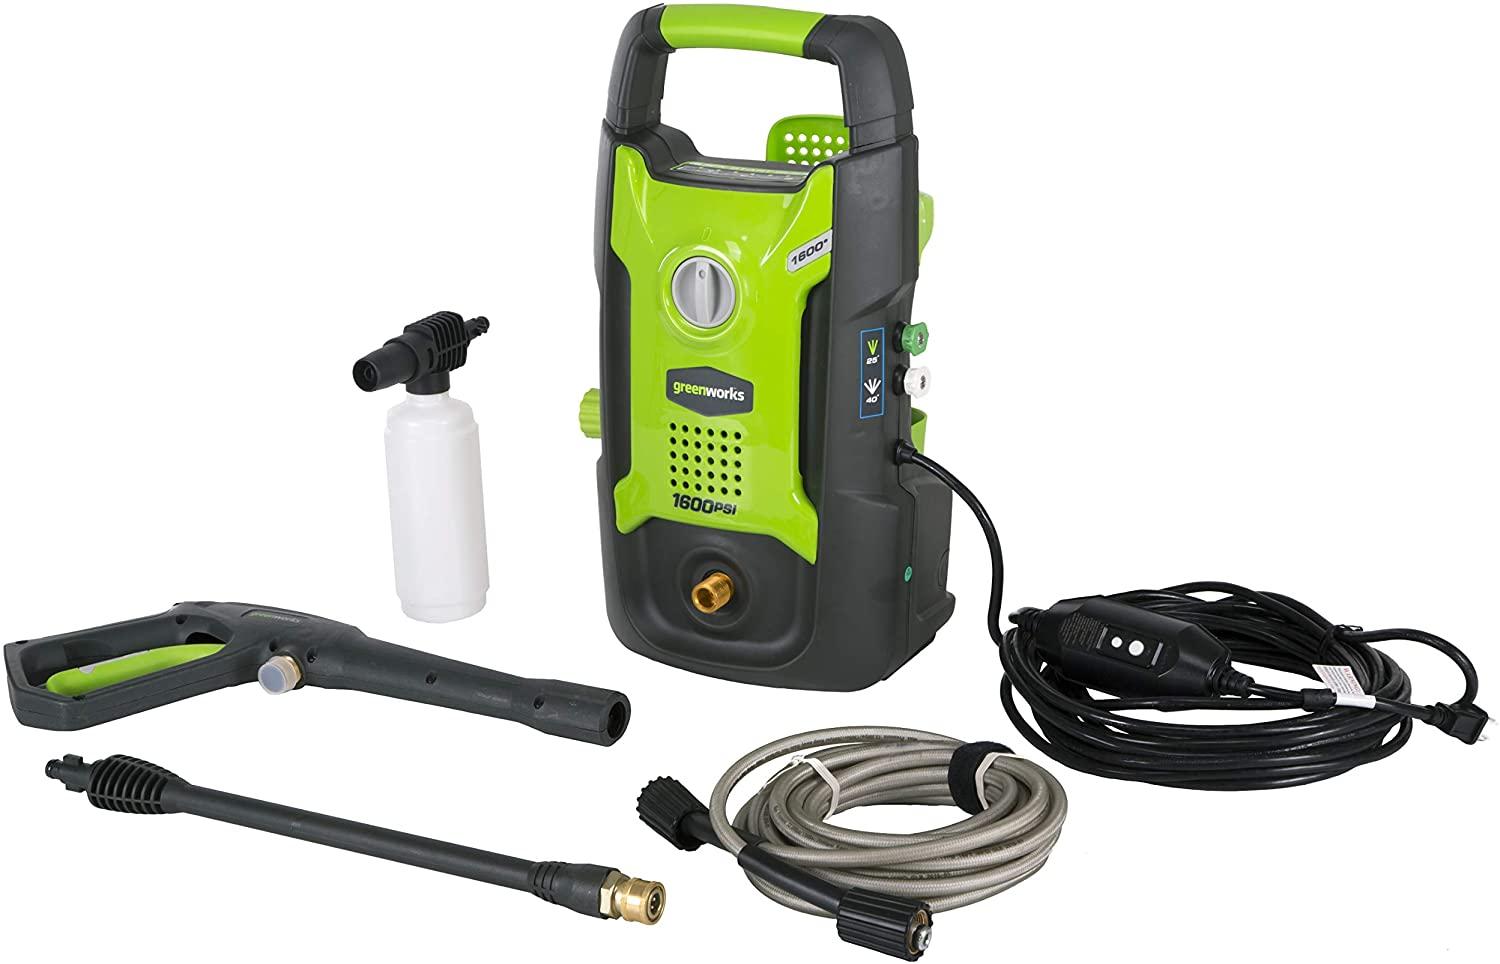 GreenWorks 1600PSI 13A Pressure Washer for $69 Shipped